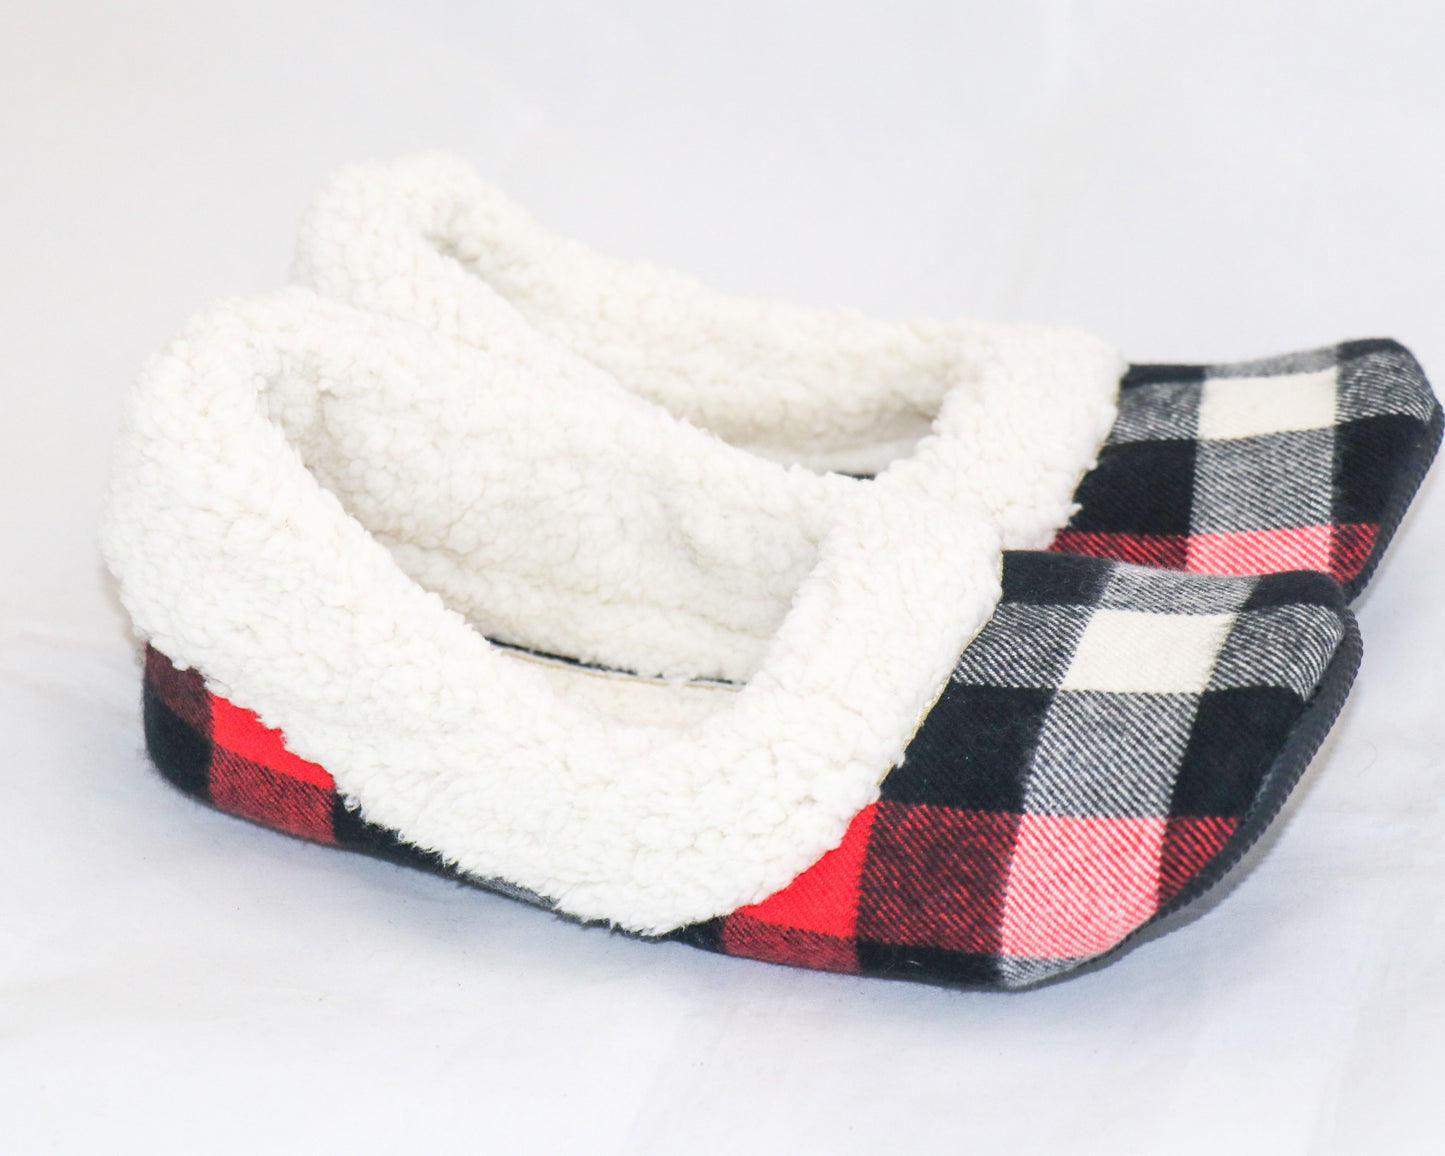 red and black flannel slippers with cream sherpa inside